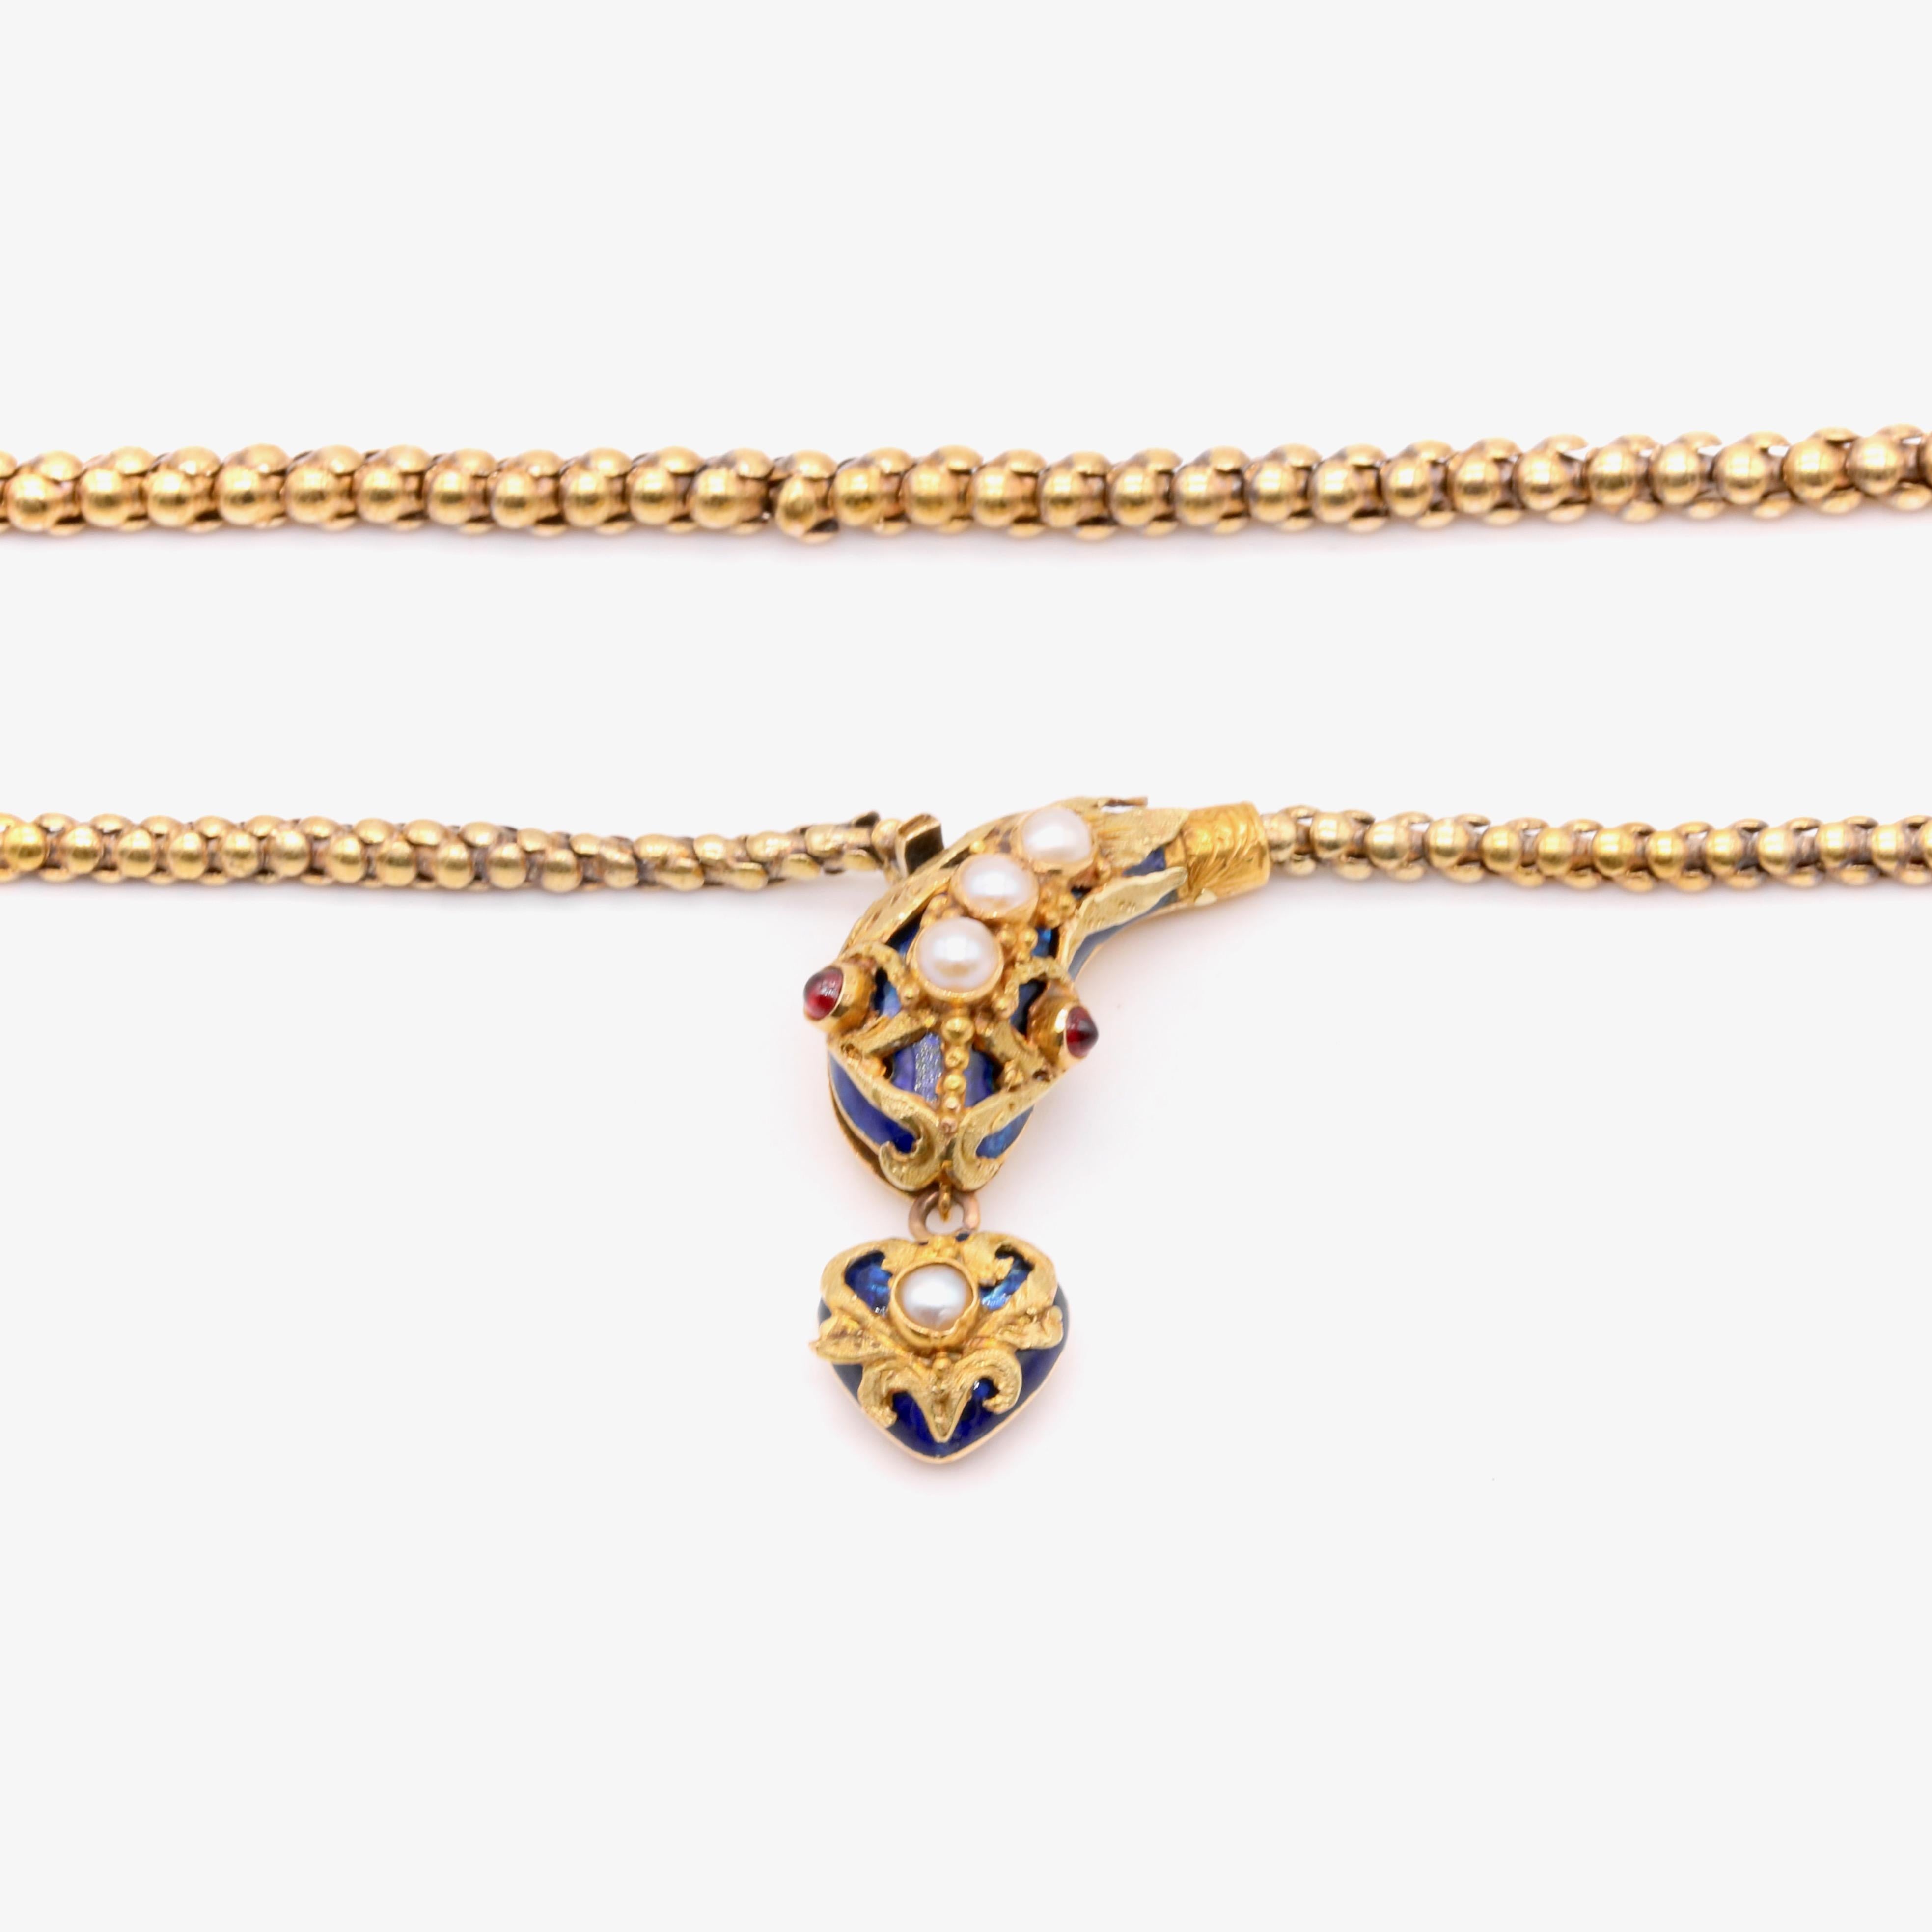 Antique Victorian 1850s 18K Gold Blue Enamel Pearl & Garnet Snake Necklace In Good Condition For Sale In Staines-Upon-Thames, GB